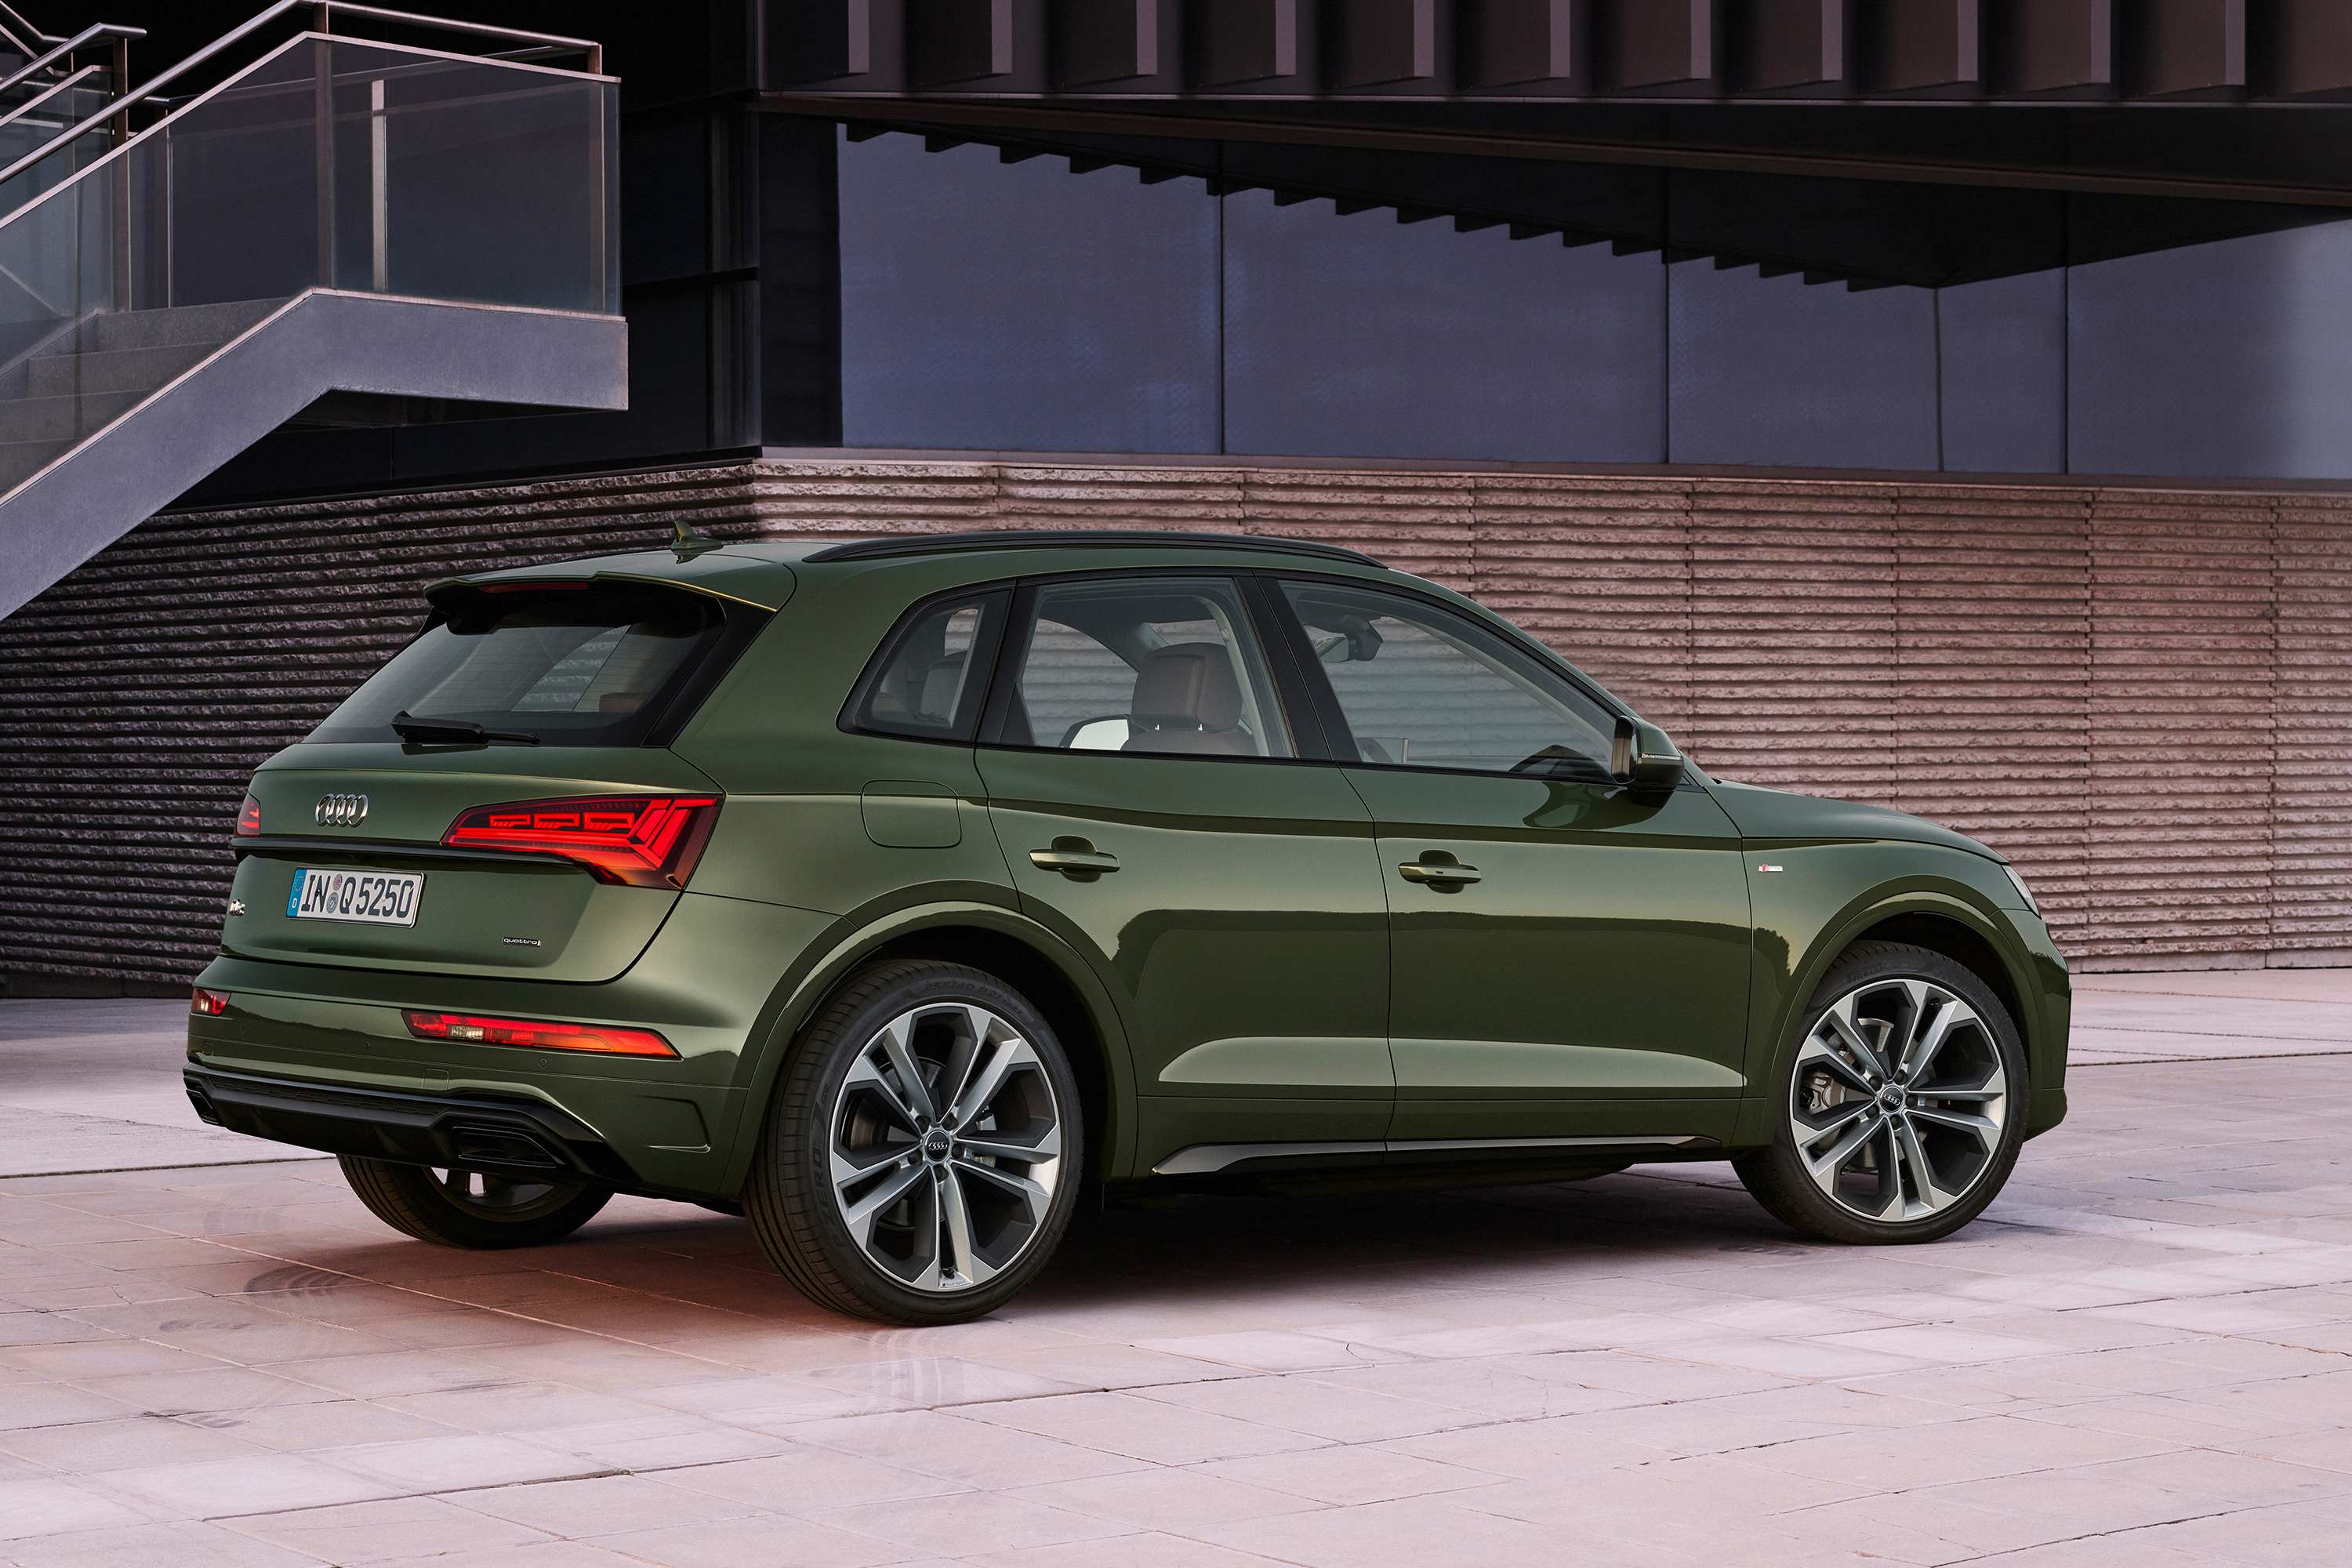 The new Audi Q5 is expected to arrive in Australia in the first-half of 2021.